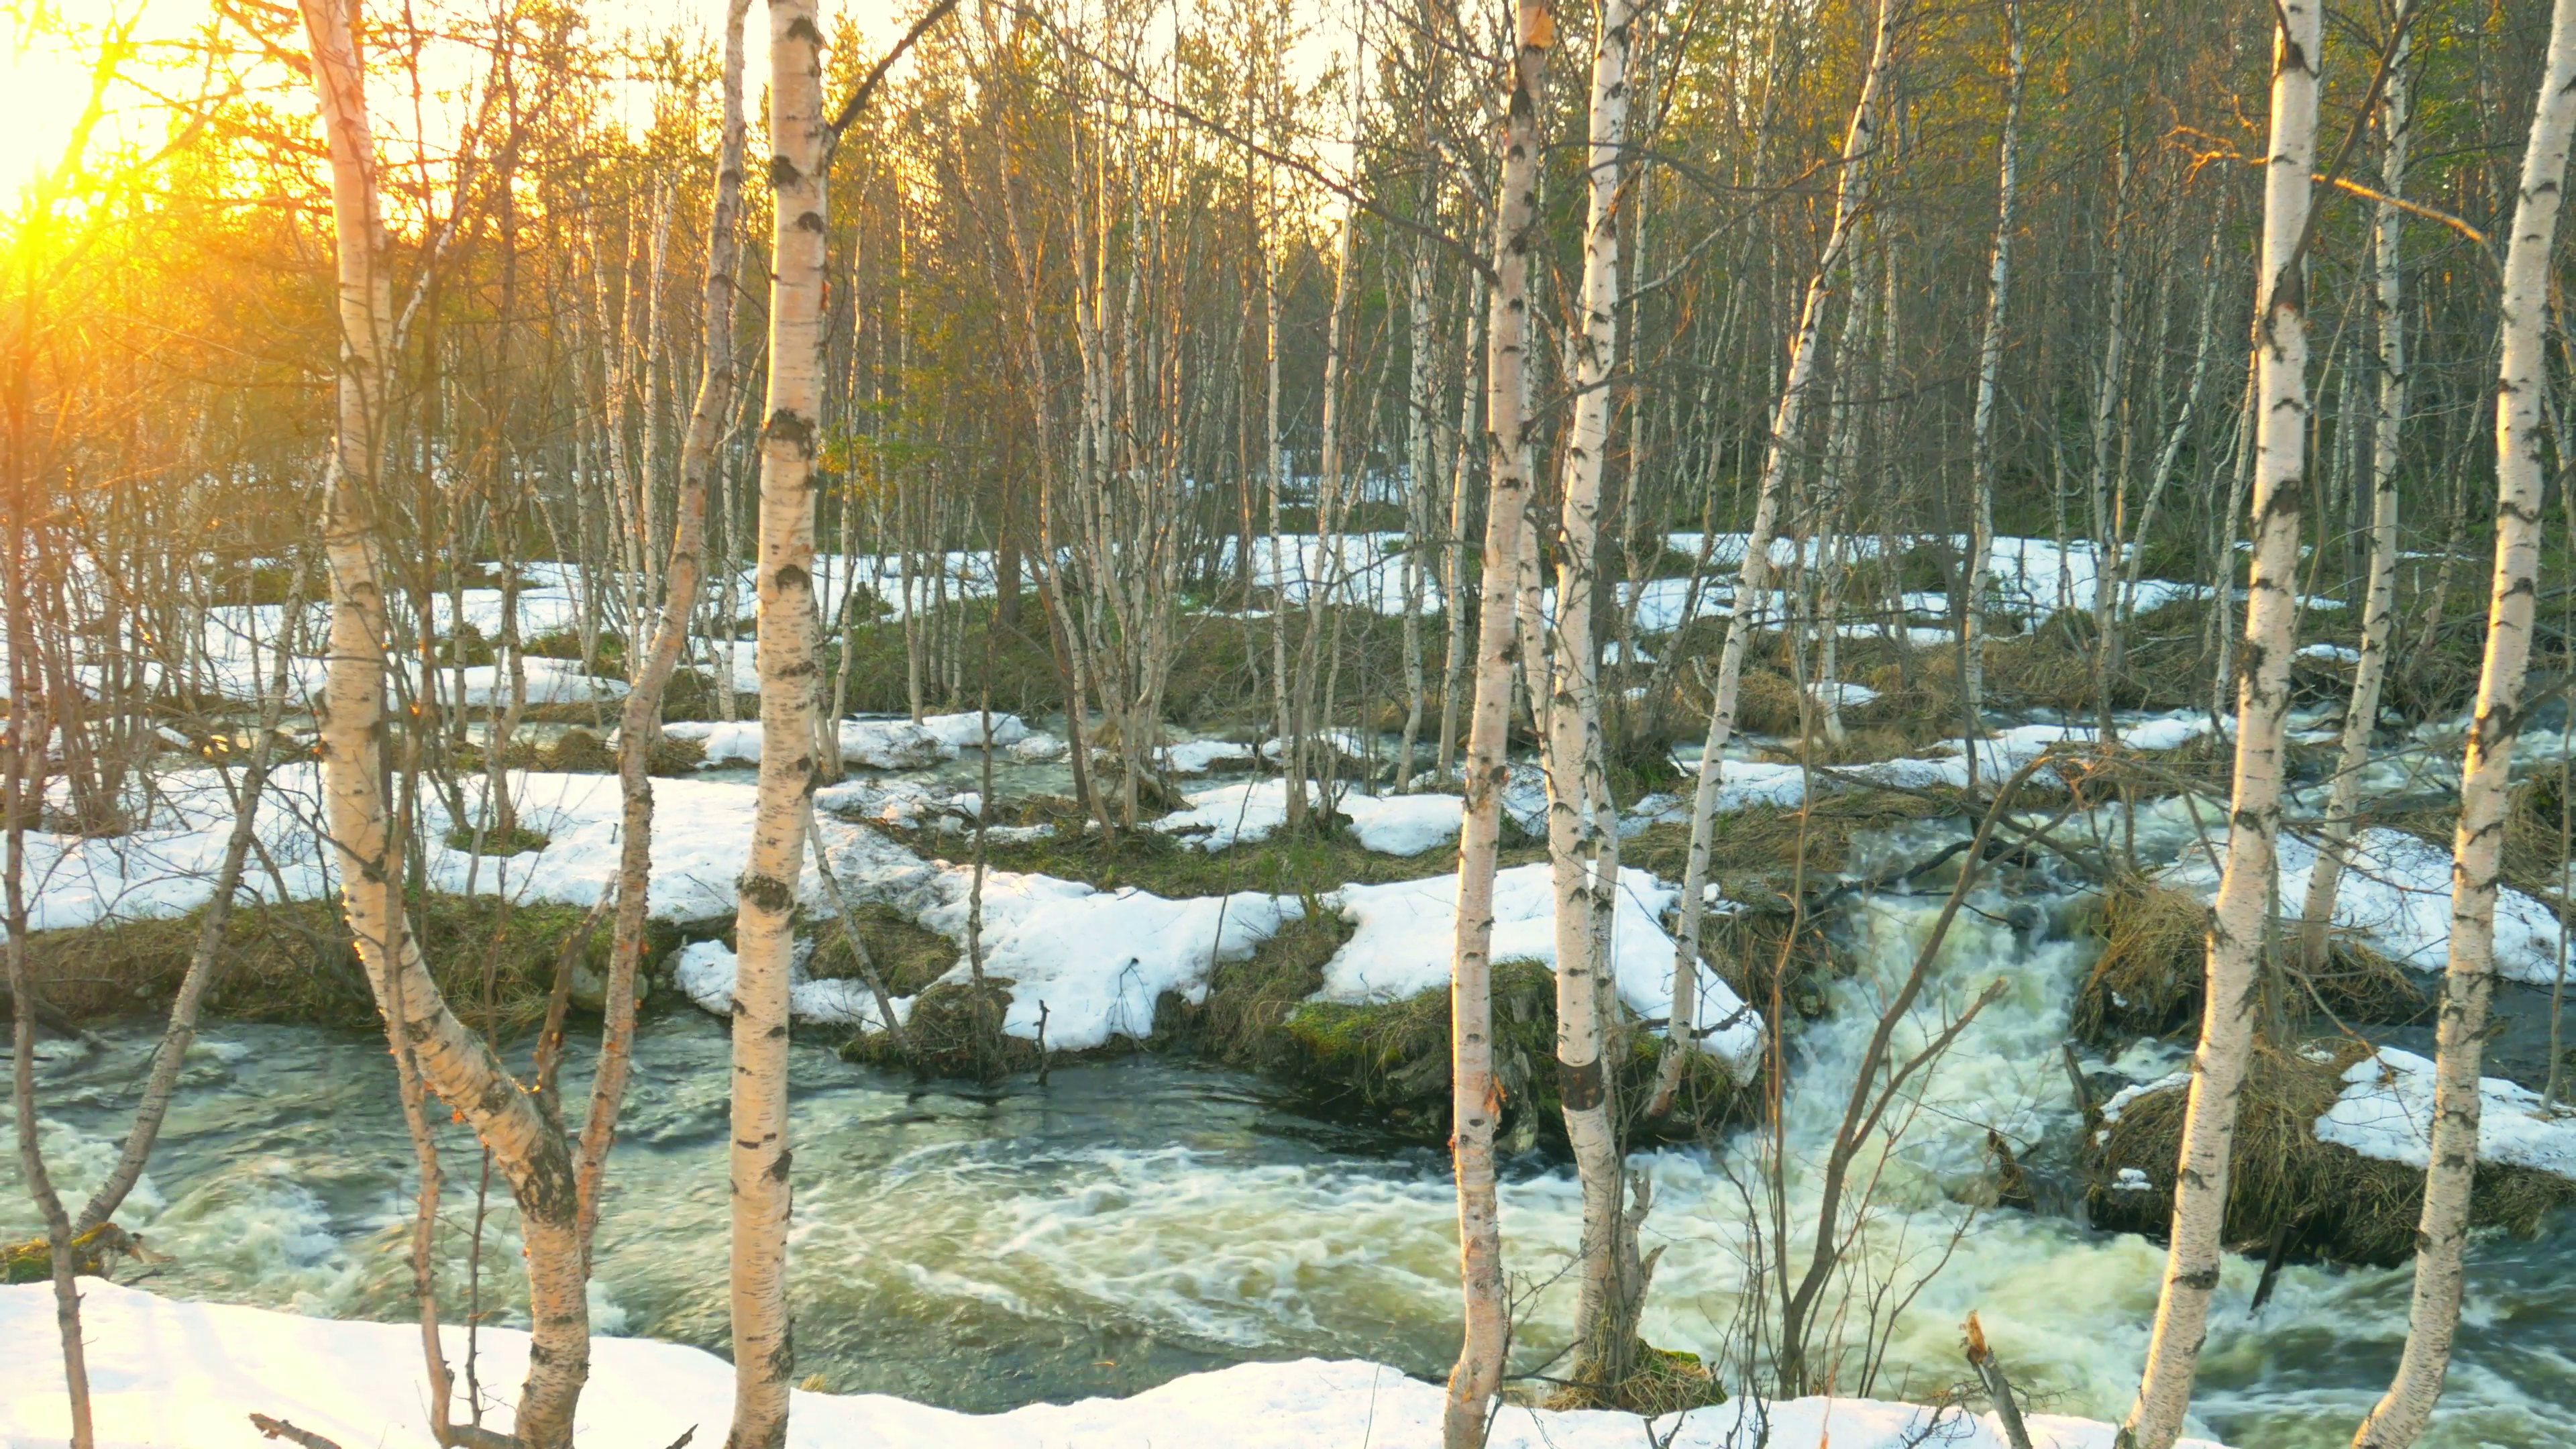 The melting snow in the spring.Rough river in the forest at sunset ...